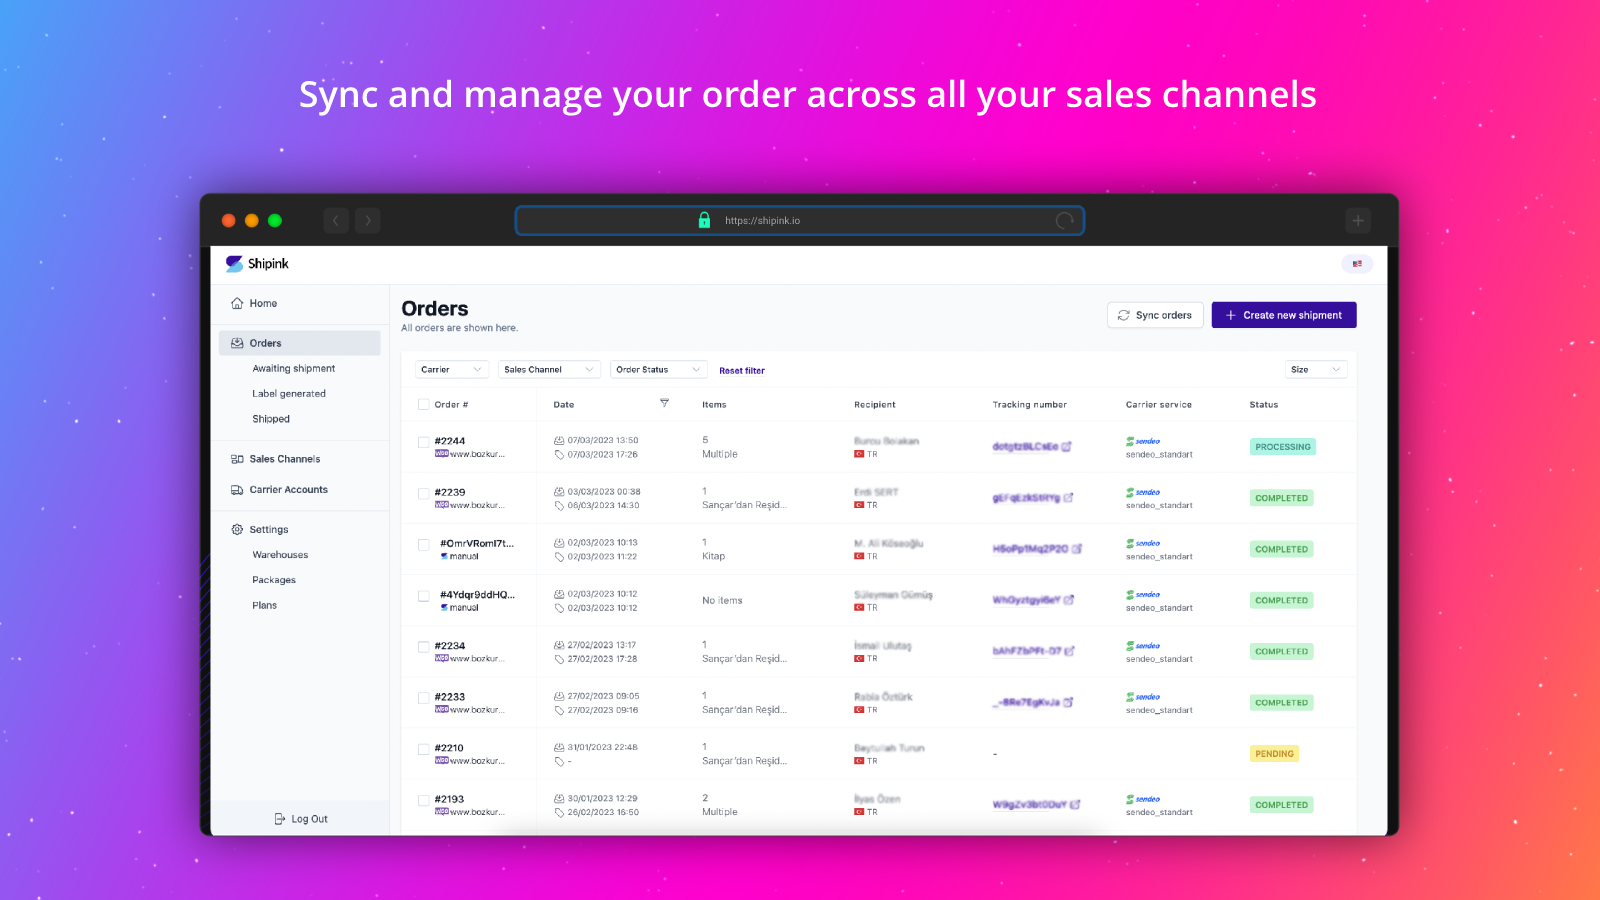 Sync and manage orders